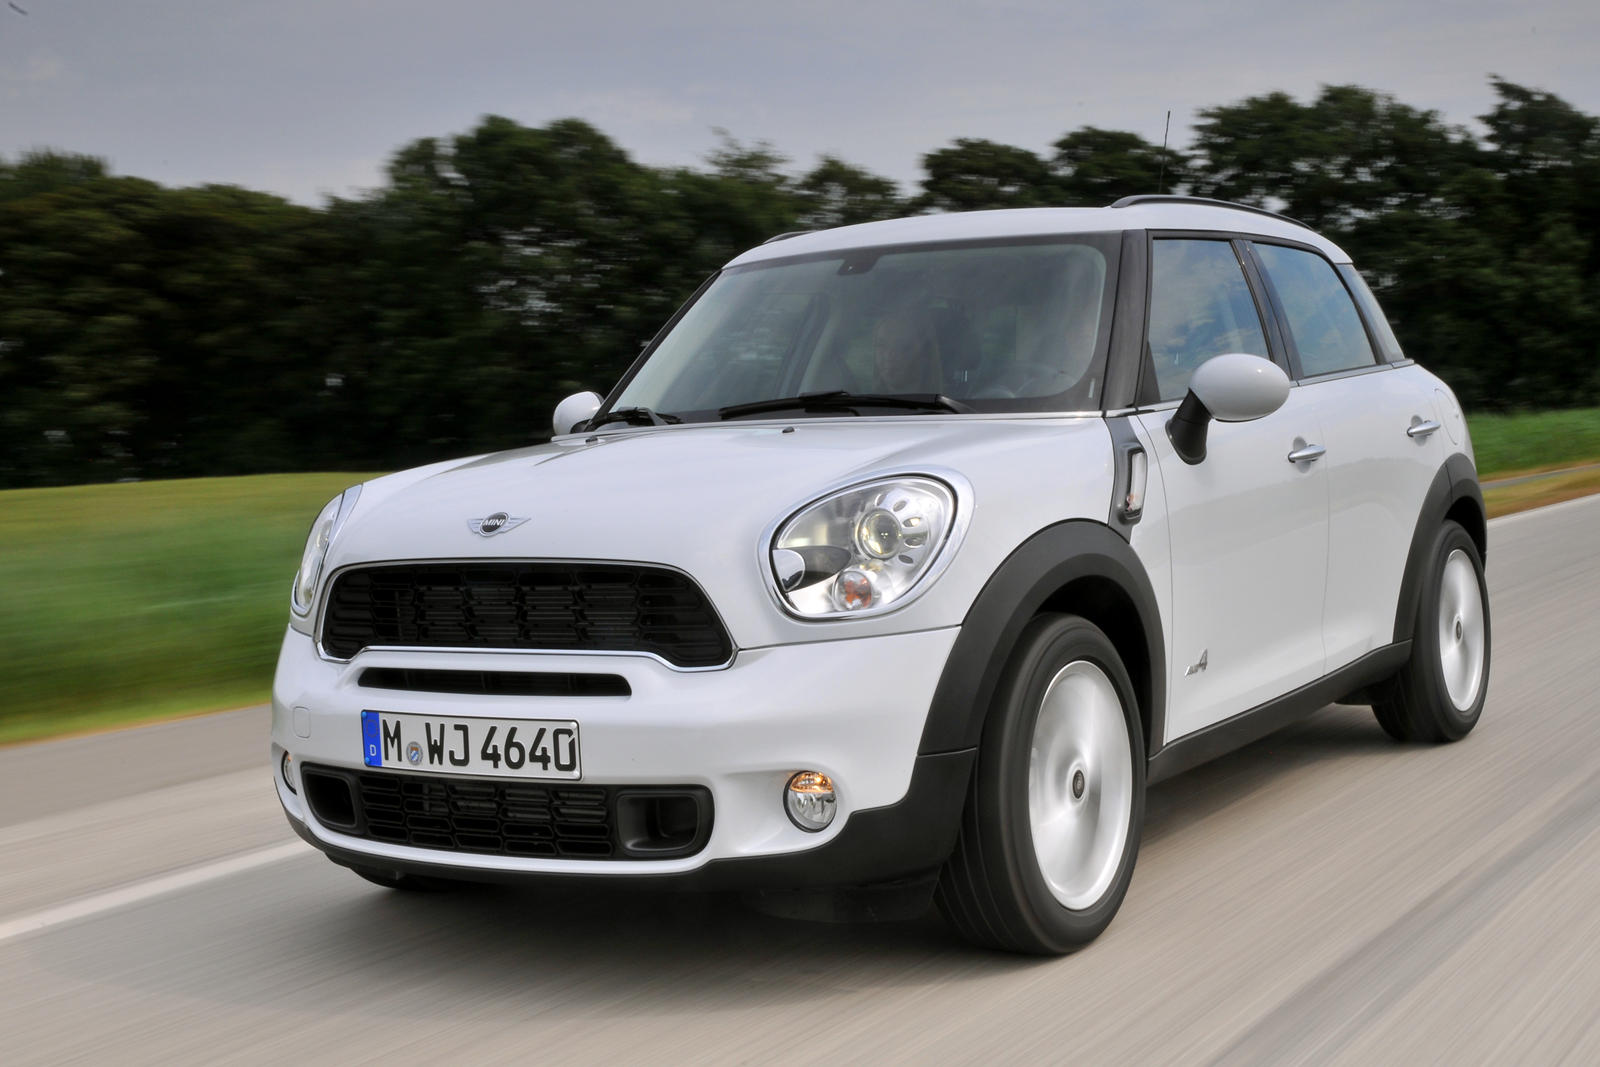 2014 Mini Cooper Countryman Front View Driving